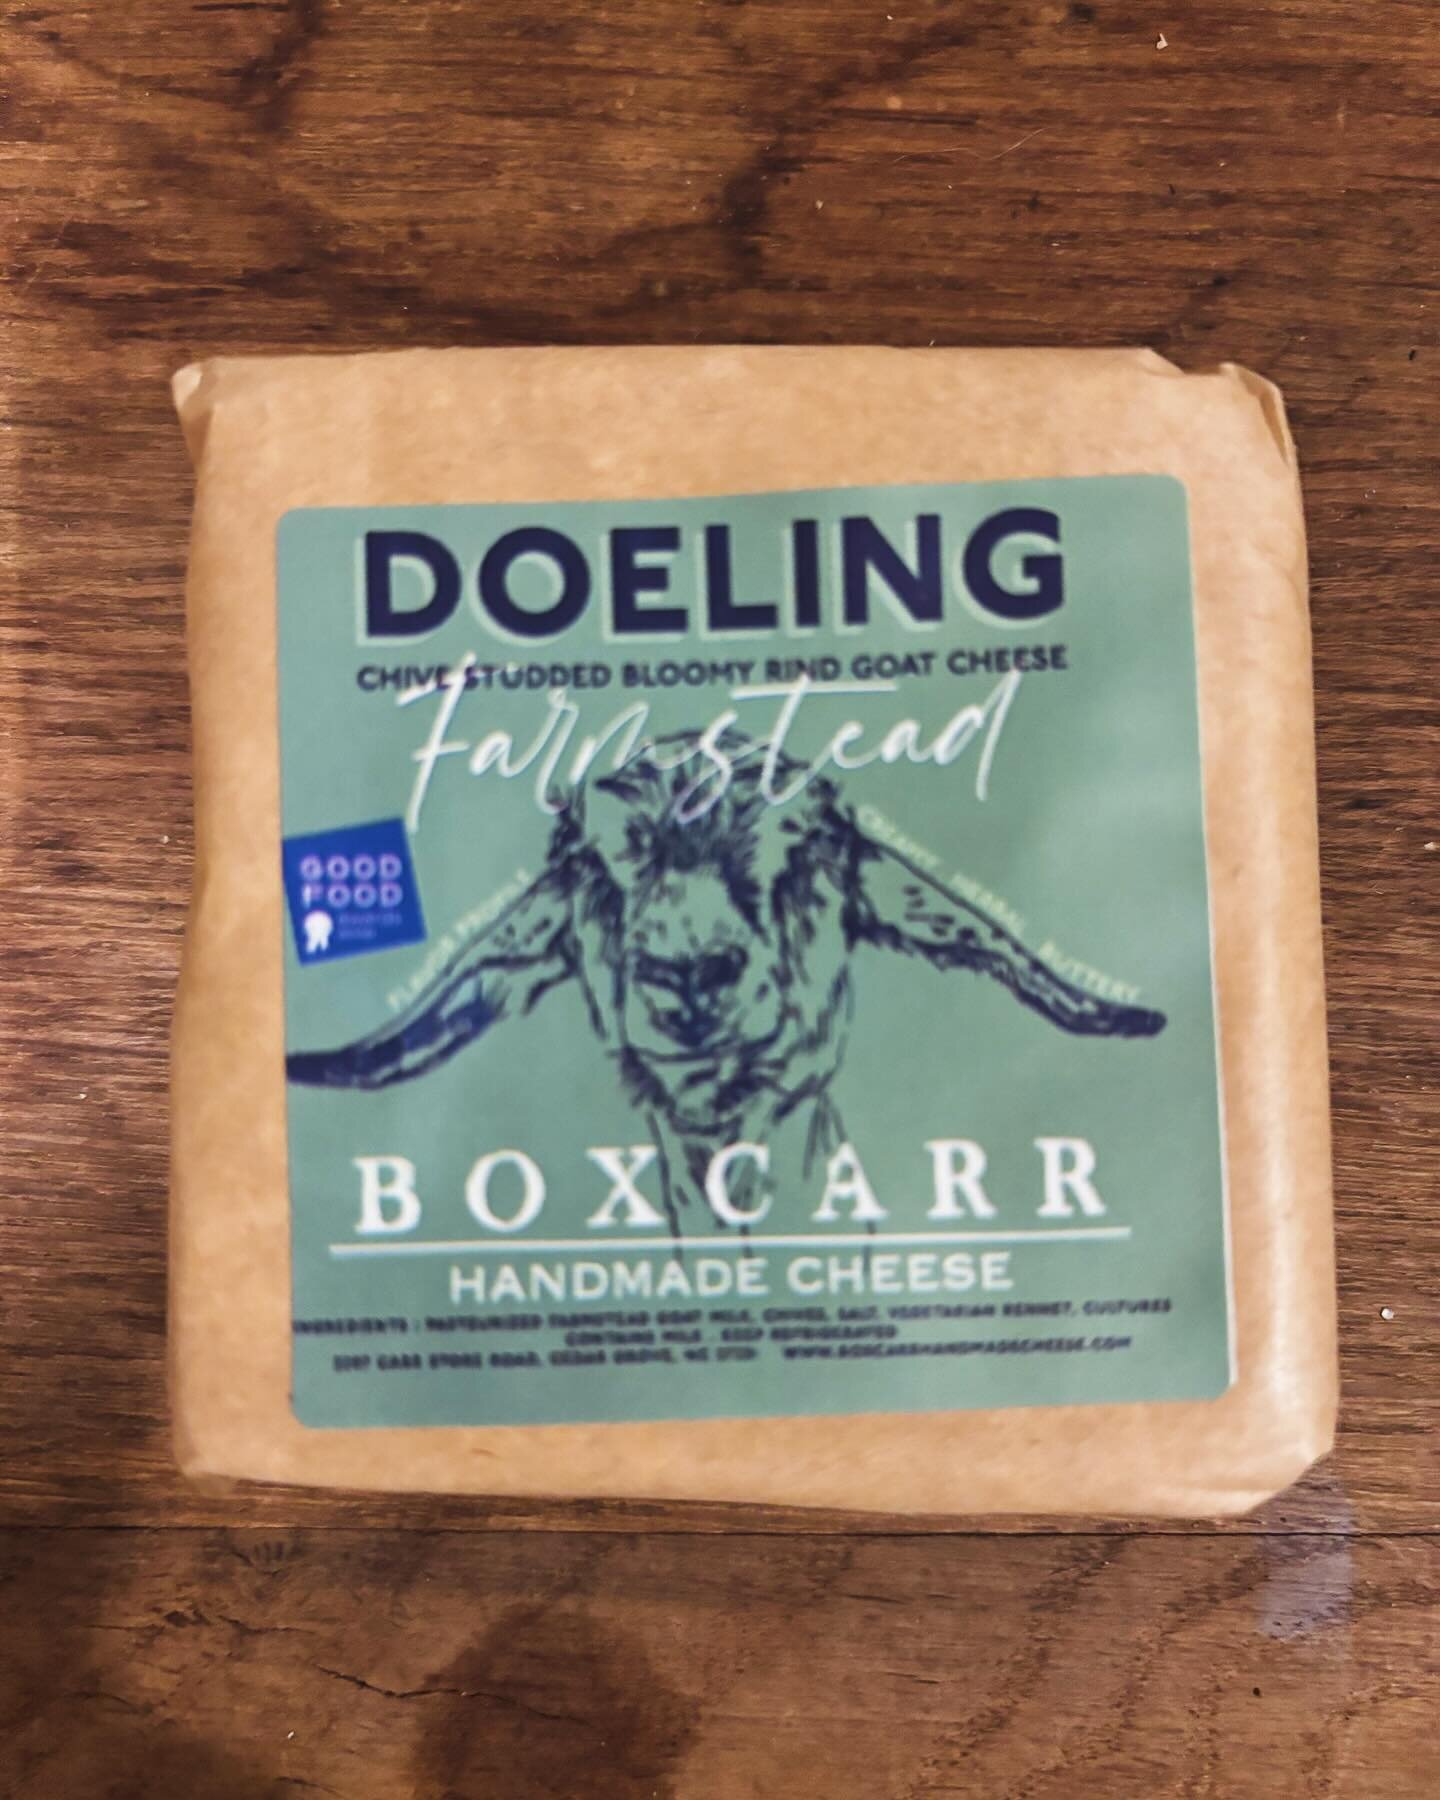 We will be at the @southdurhamfarmersmarket and the @durhamfarmersmarket tommrow till noon! We will have the last of this seasons #doeling ! Its so good. Go and try some. #farmsteadgoatsmilk #farmsteadgoatcheese #artisonalcheese #local #localfarm #lo